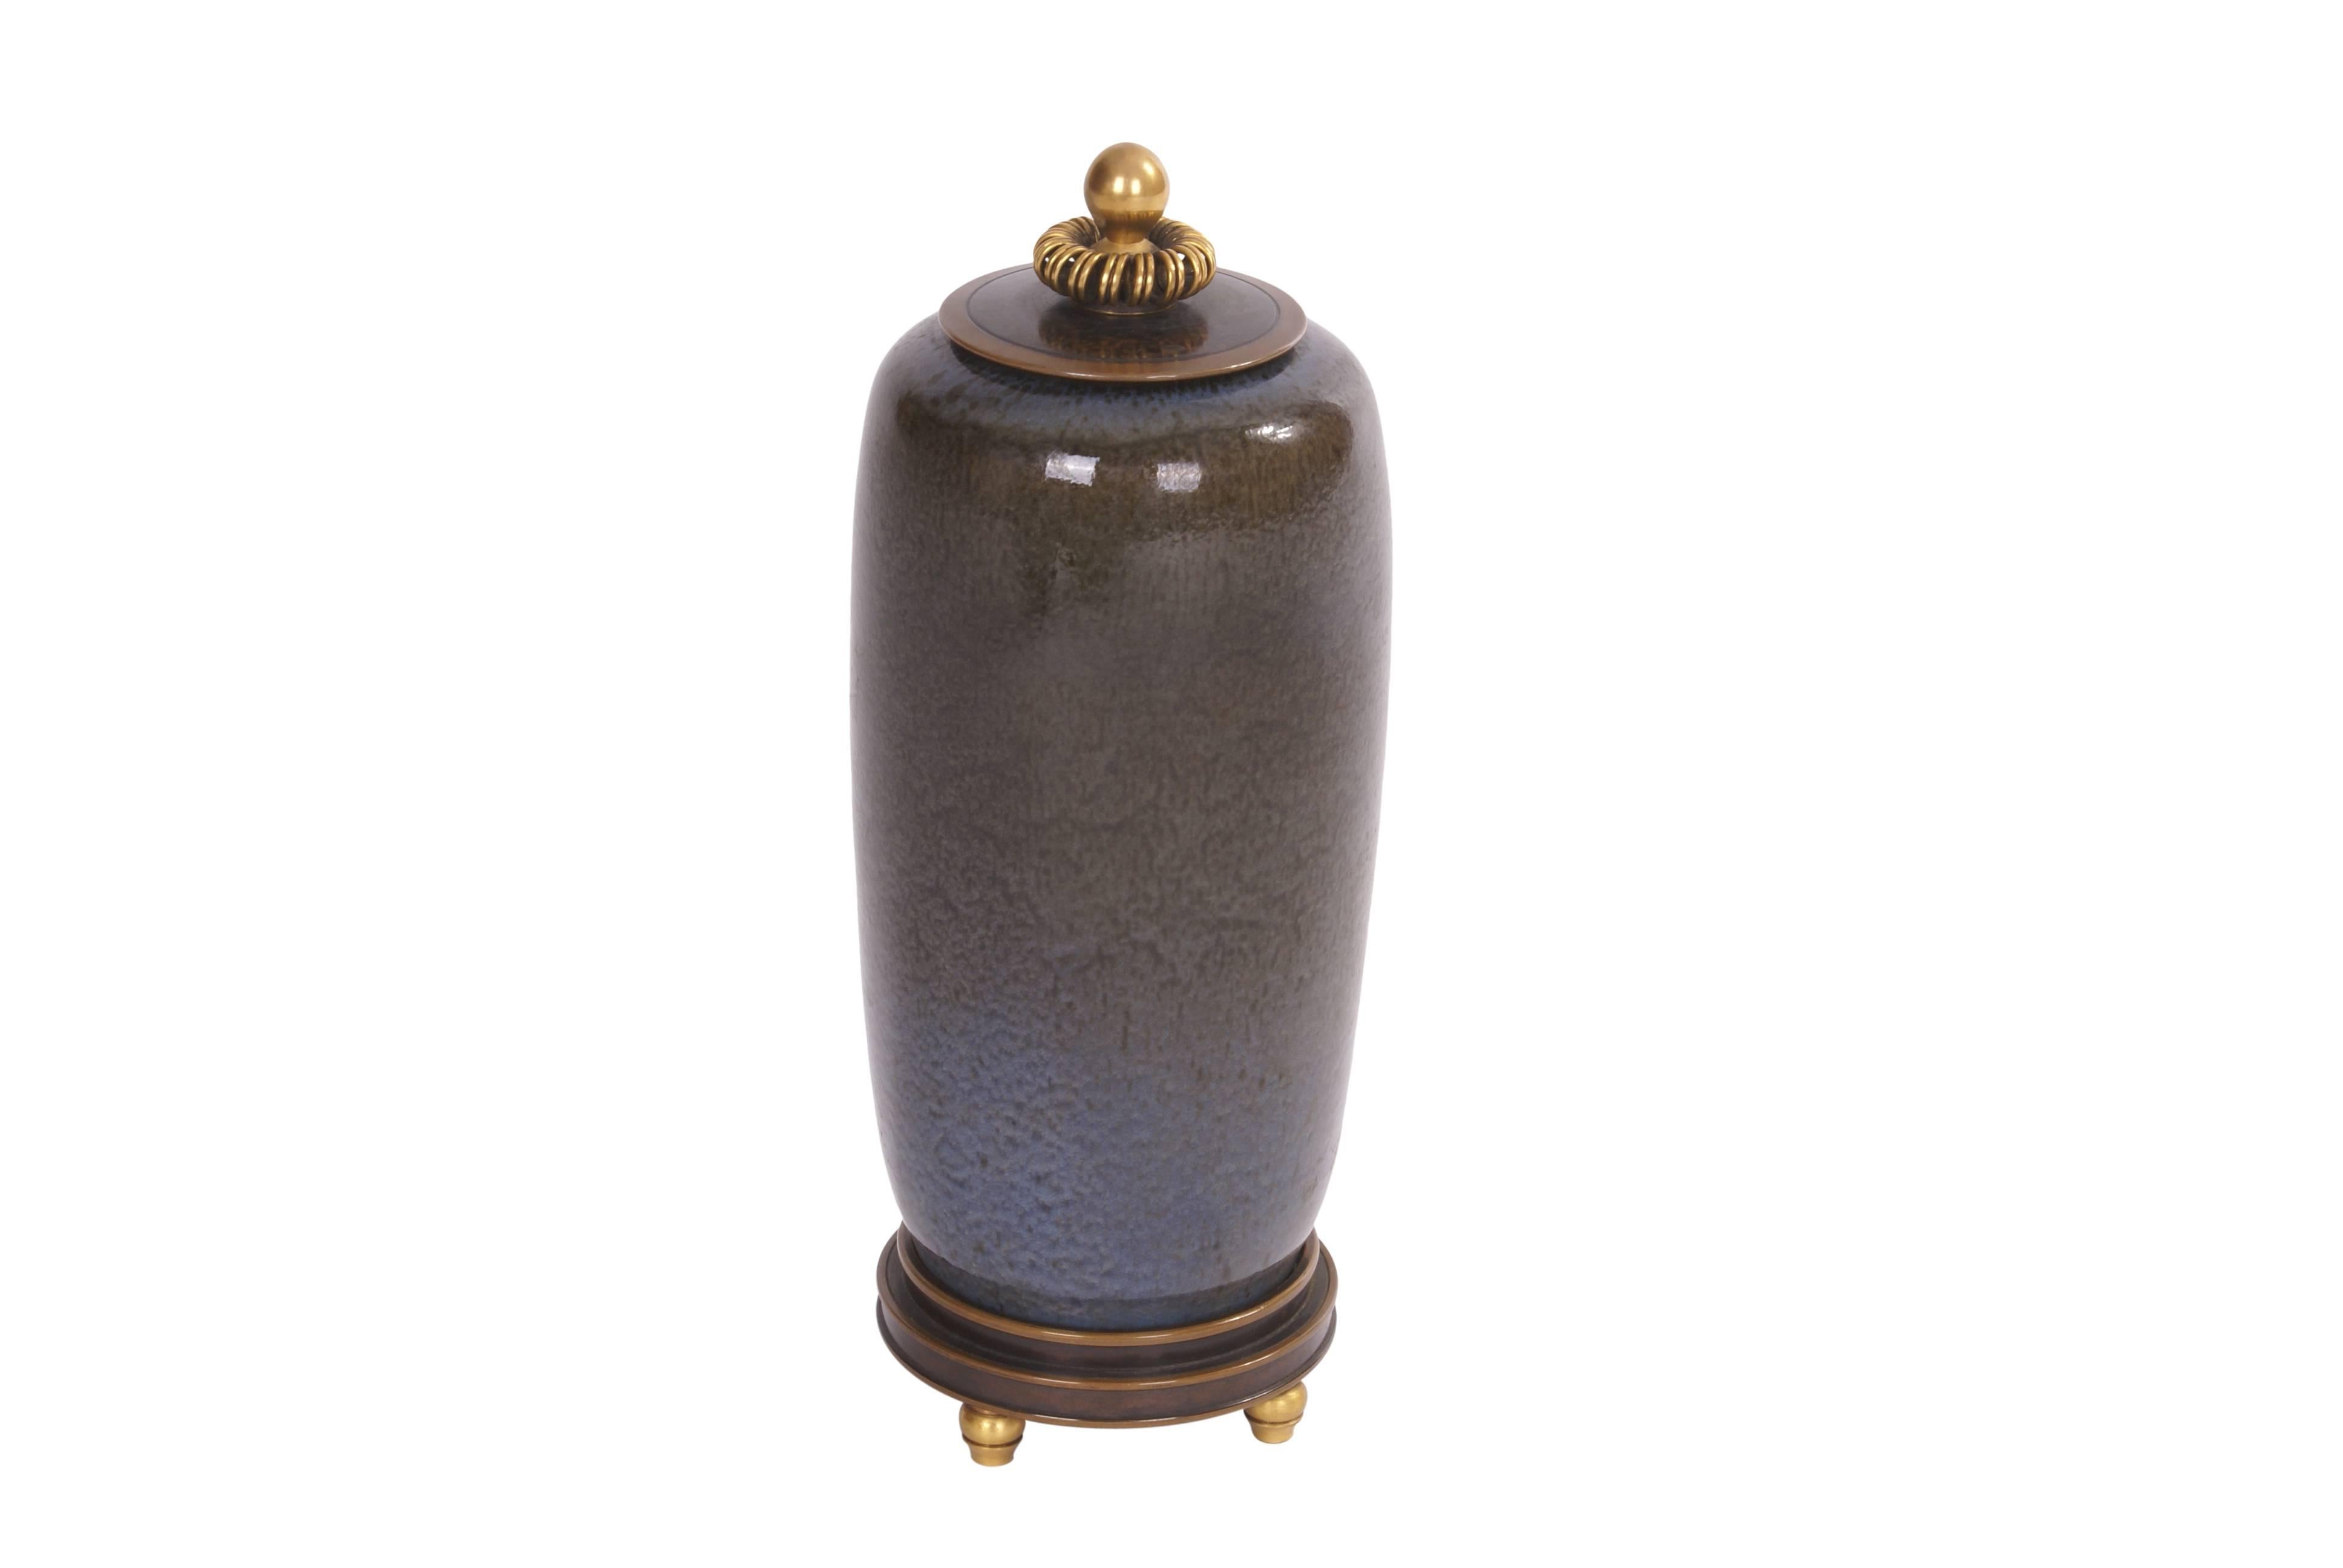 Nils Thorsson cylindrical stoneware lidded jar. Decorated with Clair de Lune glaze. Signed monogram, 4272. Royal Copenhagen. Made 1962. Lid and base of patinated and partly gilded bronze. Stamped monogram KA for Knud Andersen. This piece is unique.